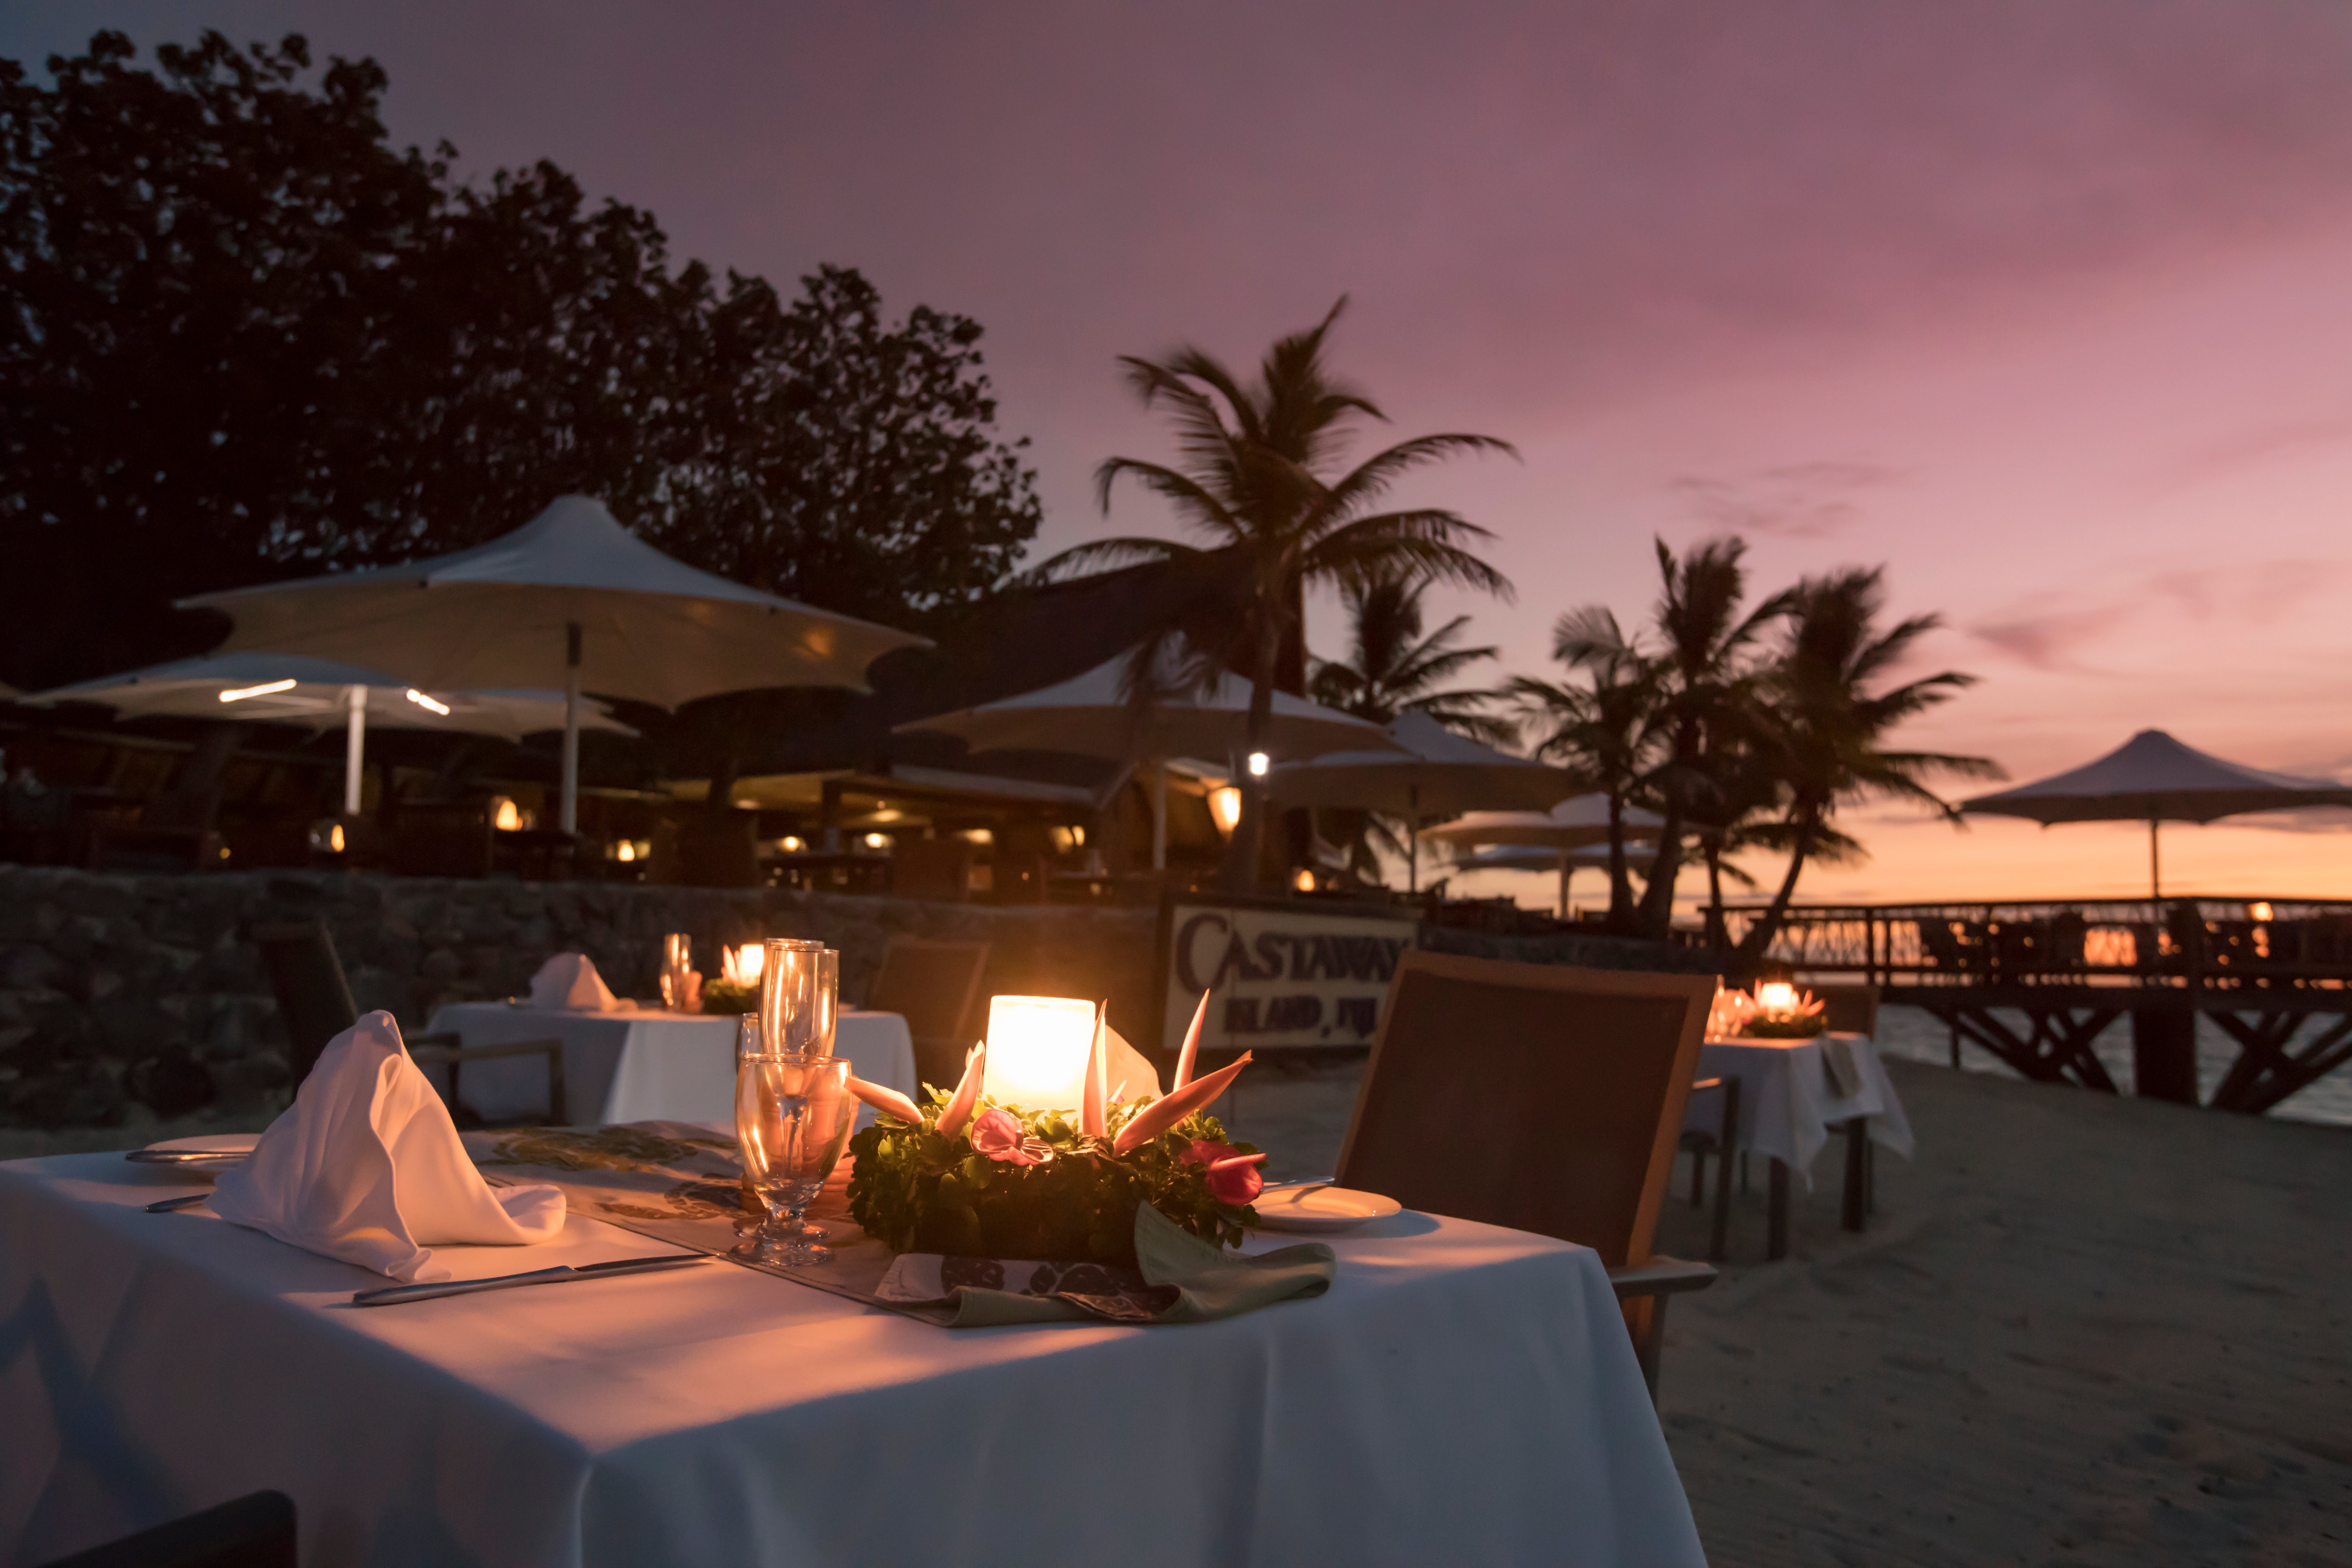 Candlelit dinner on the beach in Fiji